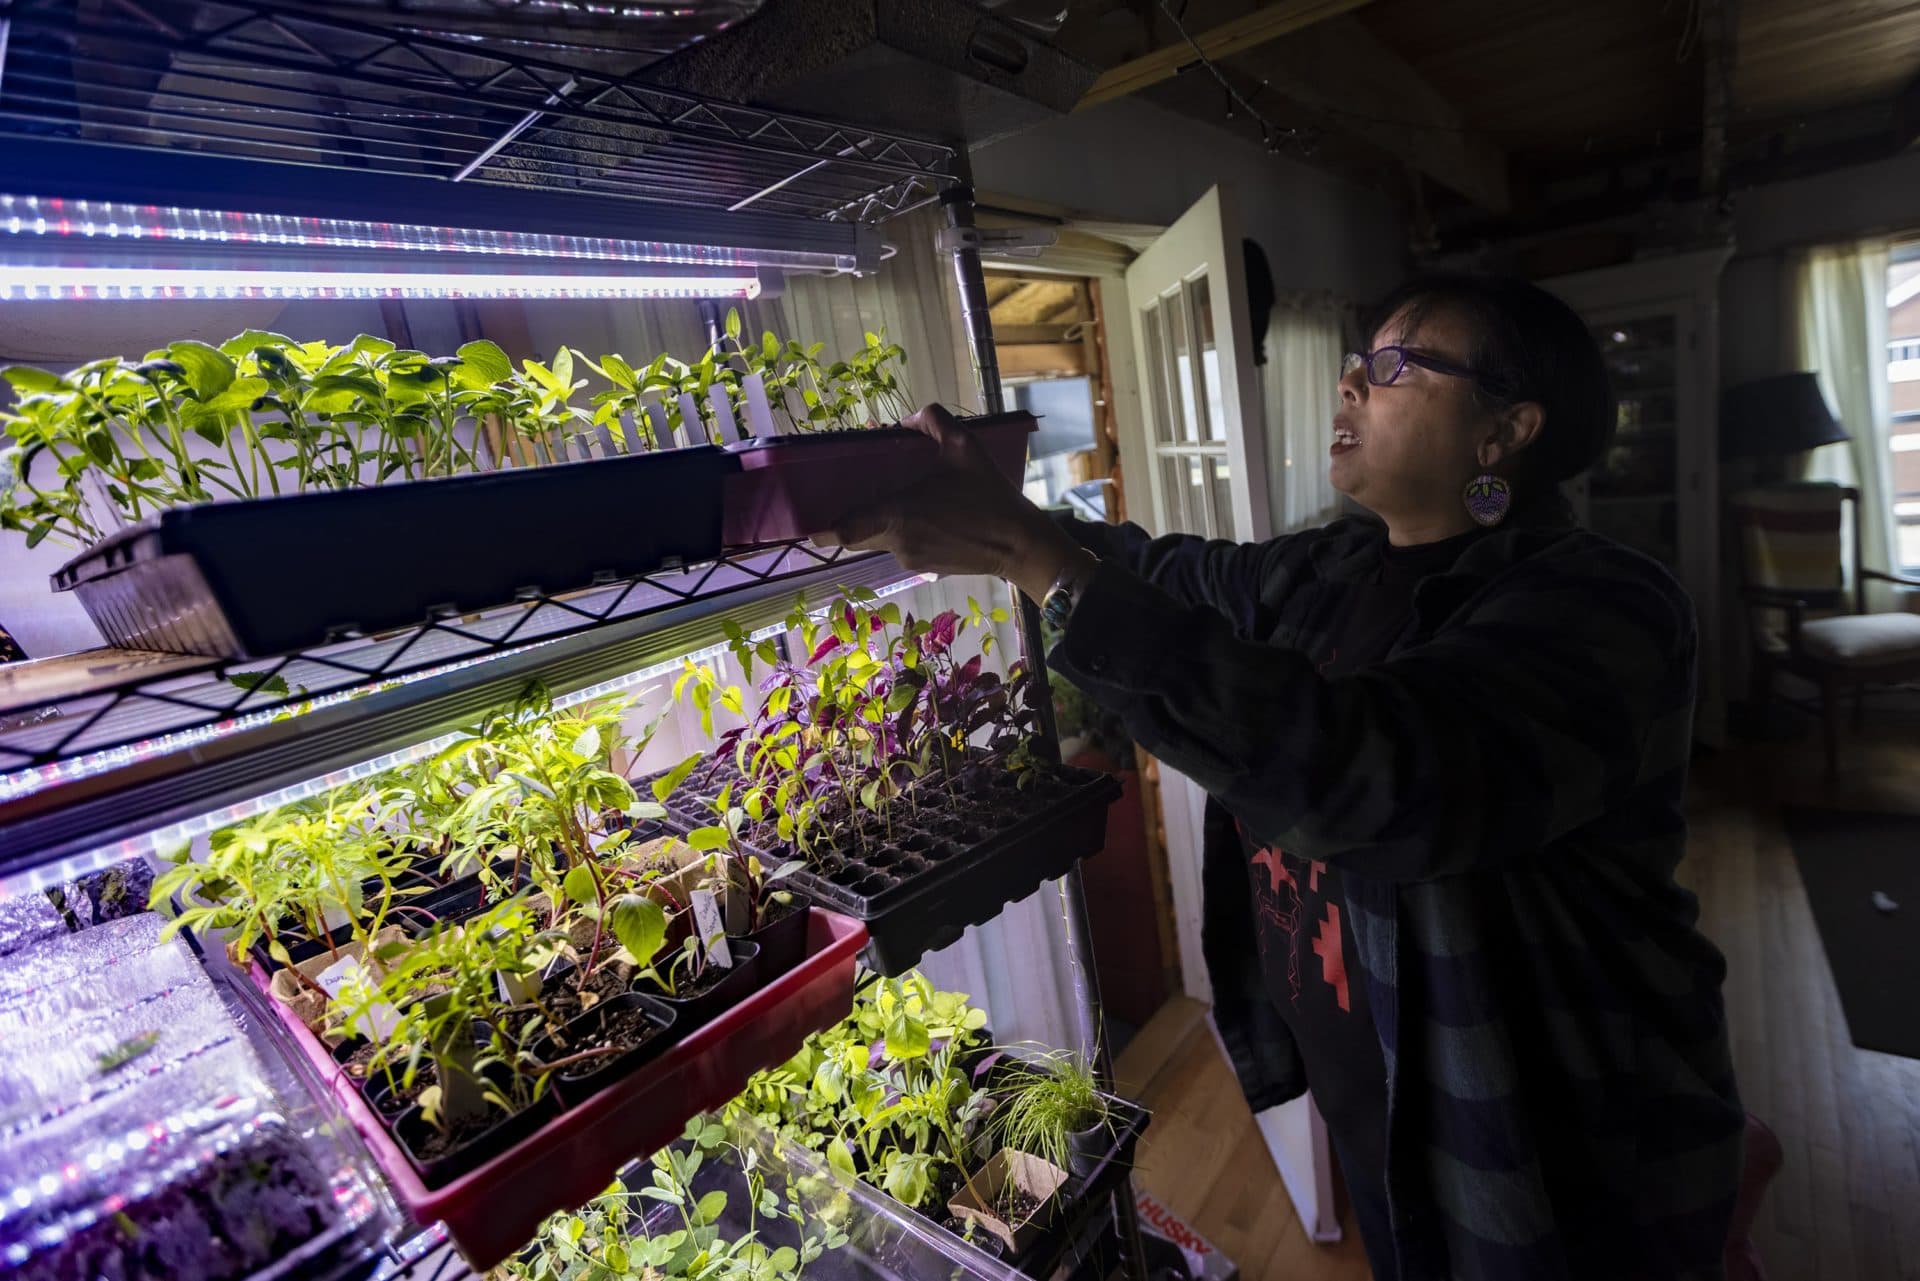 Dawn Spears checks on the seedlings she has started in her house for Ashawaug Heritage Farm in Rhode Island. (Jesse Costa/WBUR)